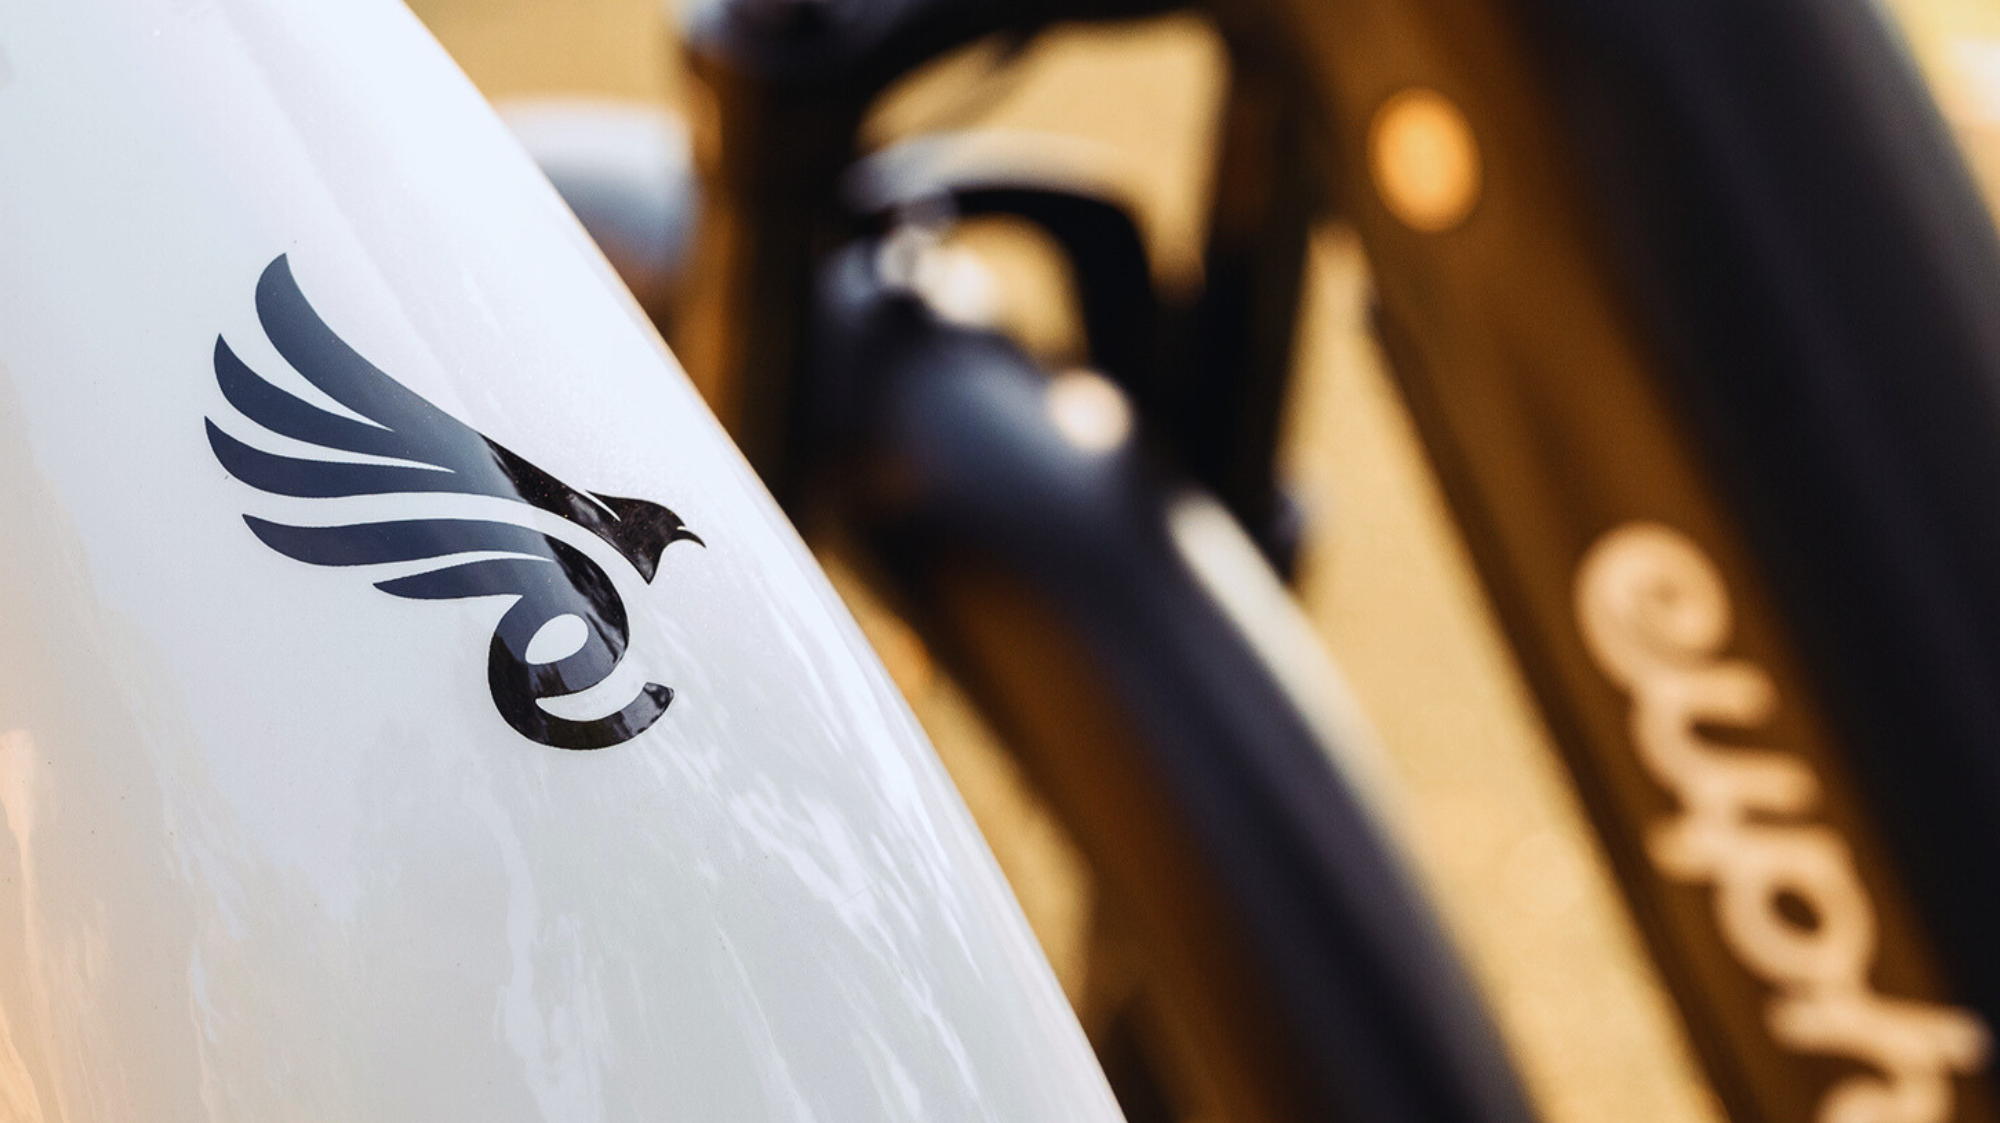 City Robin X+ Review: The Ultimate Urban E-bike Experience